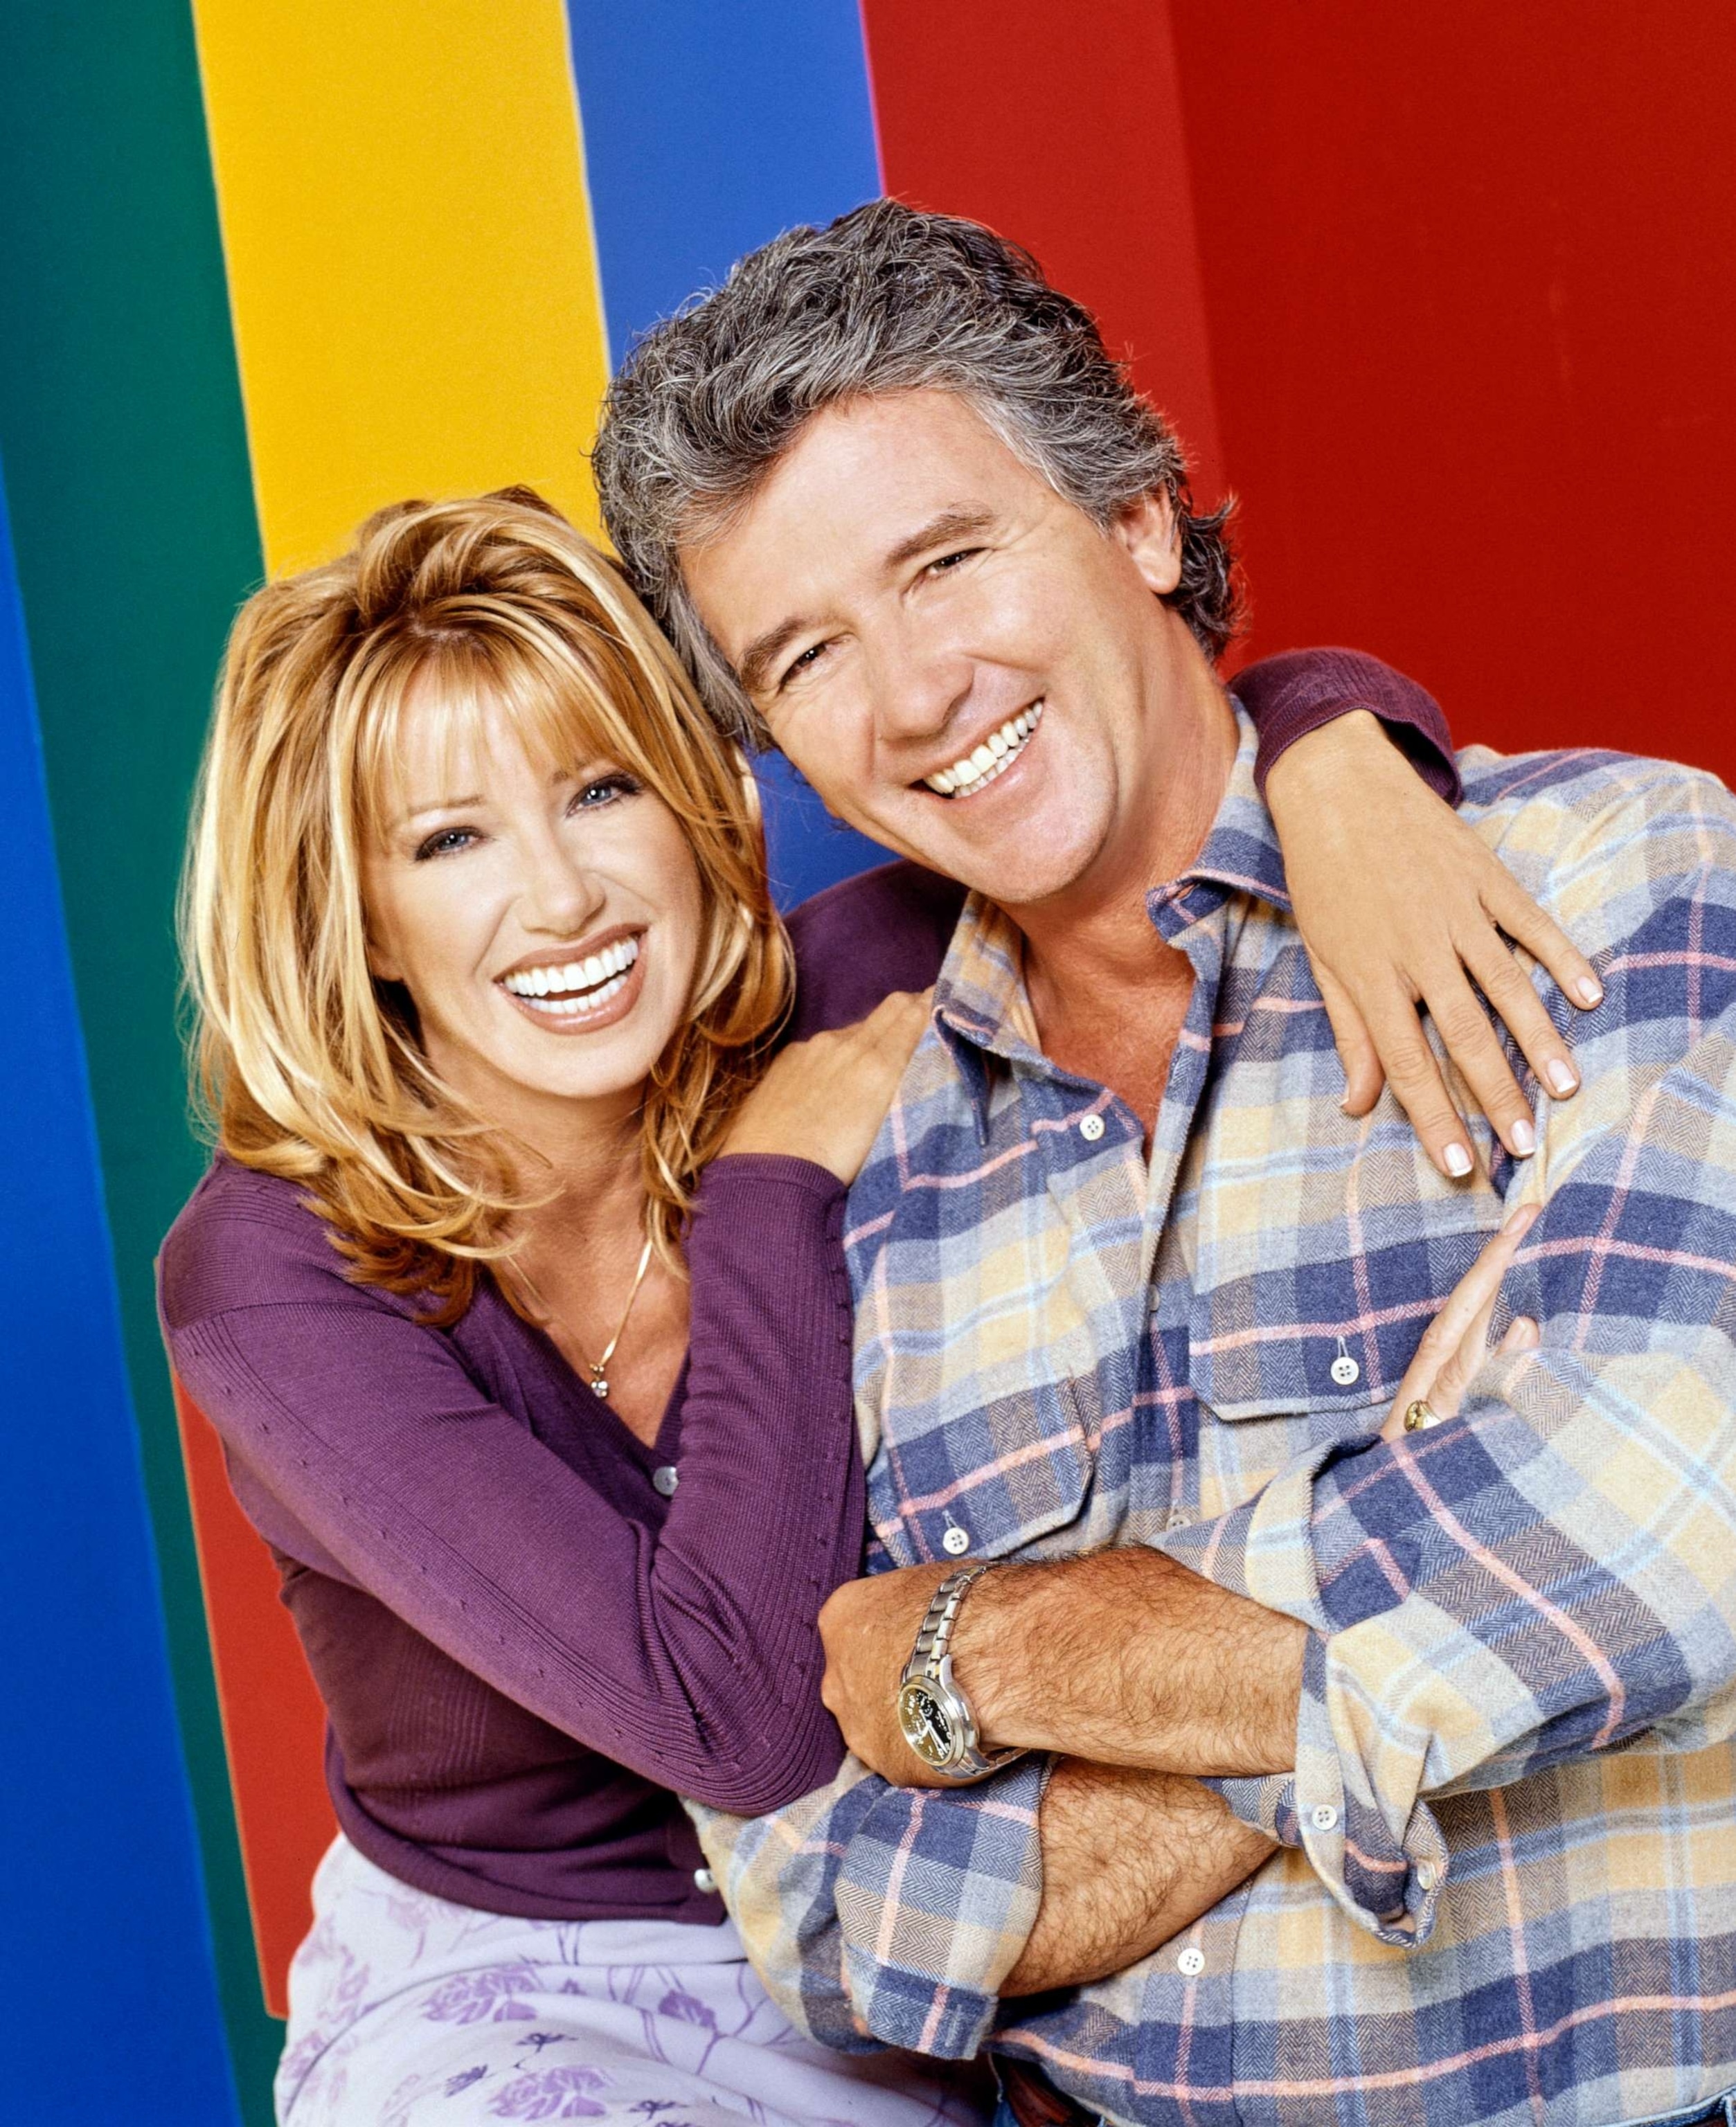 PHOTO: Suzanne Somers, as Carol Foster Lambert, and Patrick Duffy, as Frank Lambert, in a promotional photo for "Step by Step."